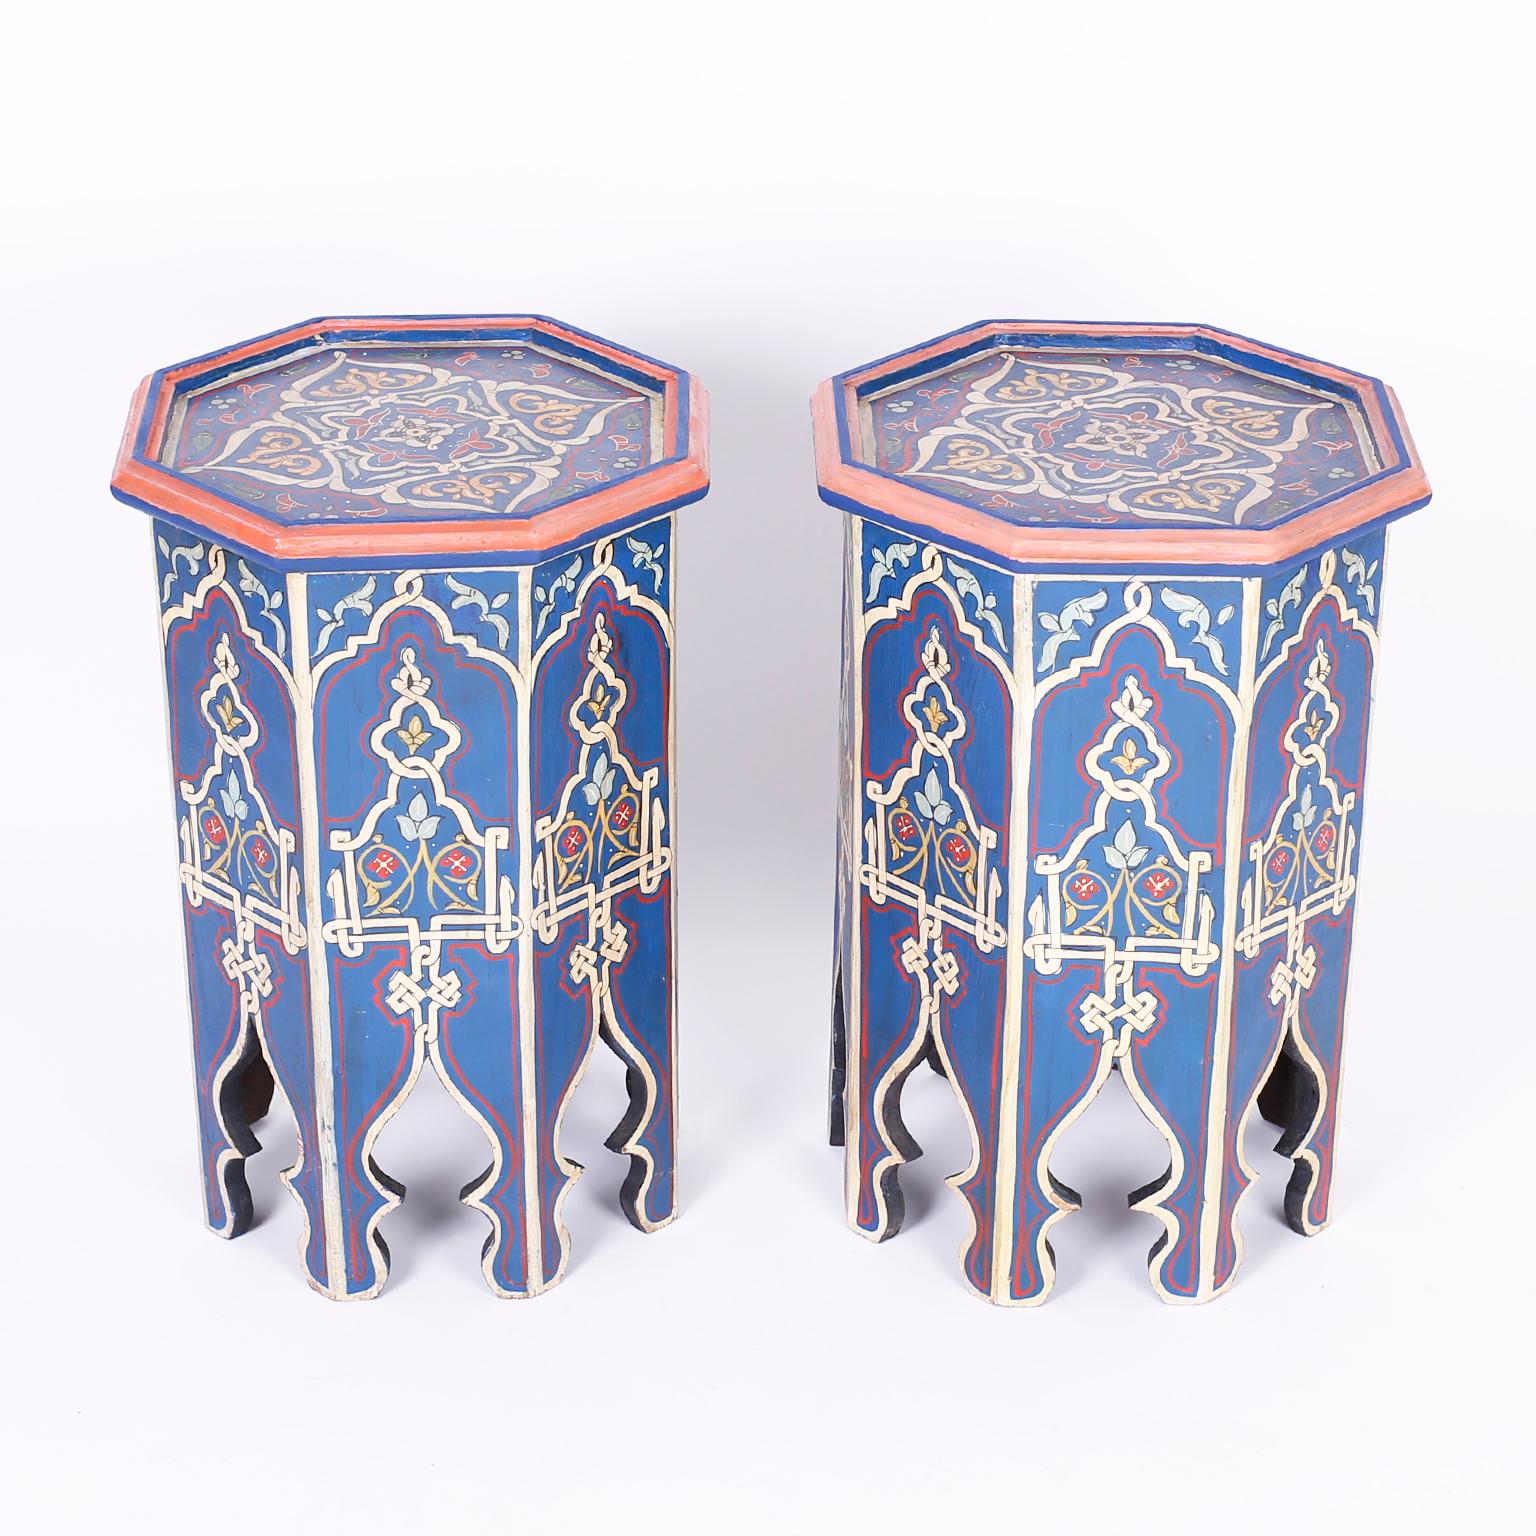 Pair of antique Moroccan wood stands with an octagon form painted with distinctive mediterranean colors in floral designs on the top and sides. The eight legs are separated by graceful Moorish arches.